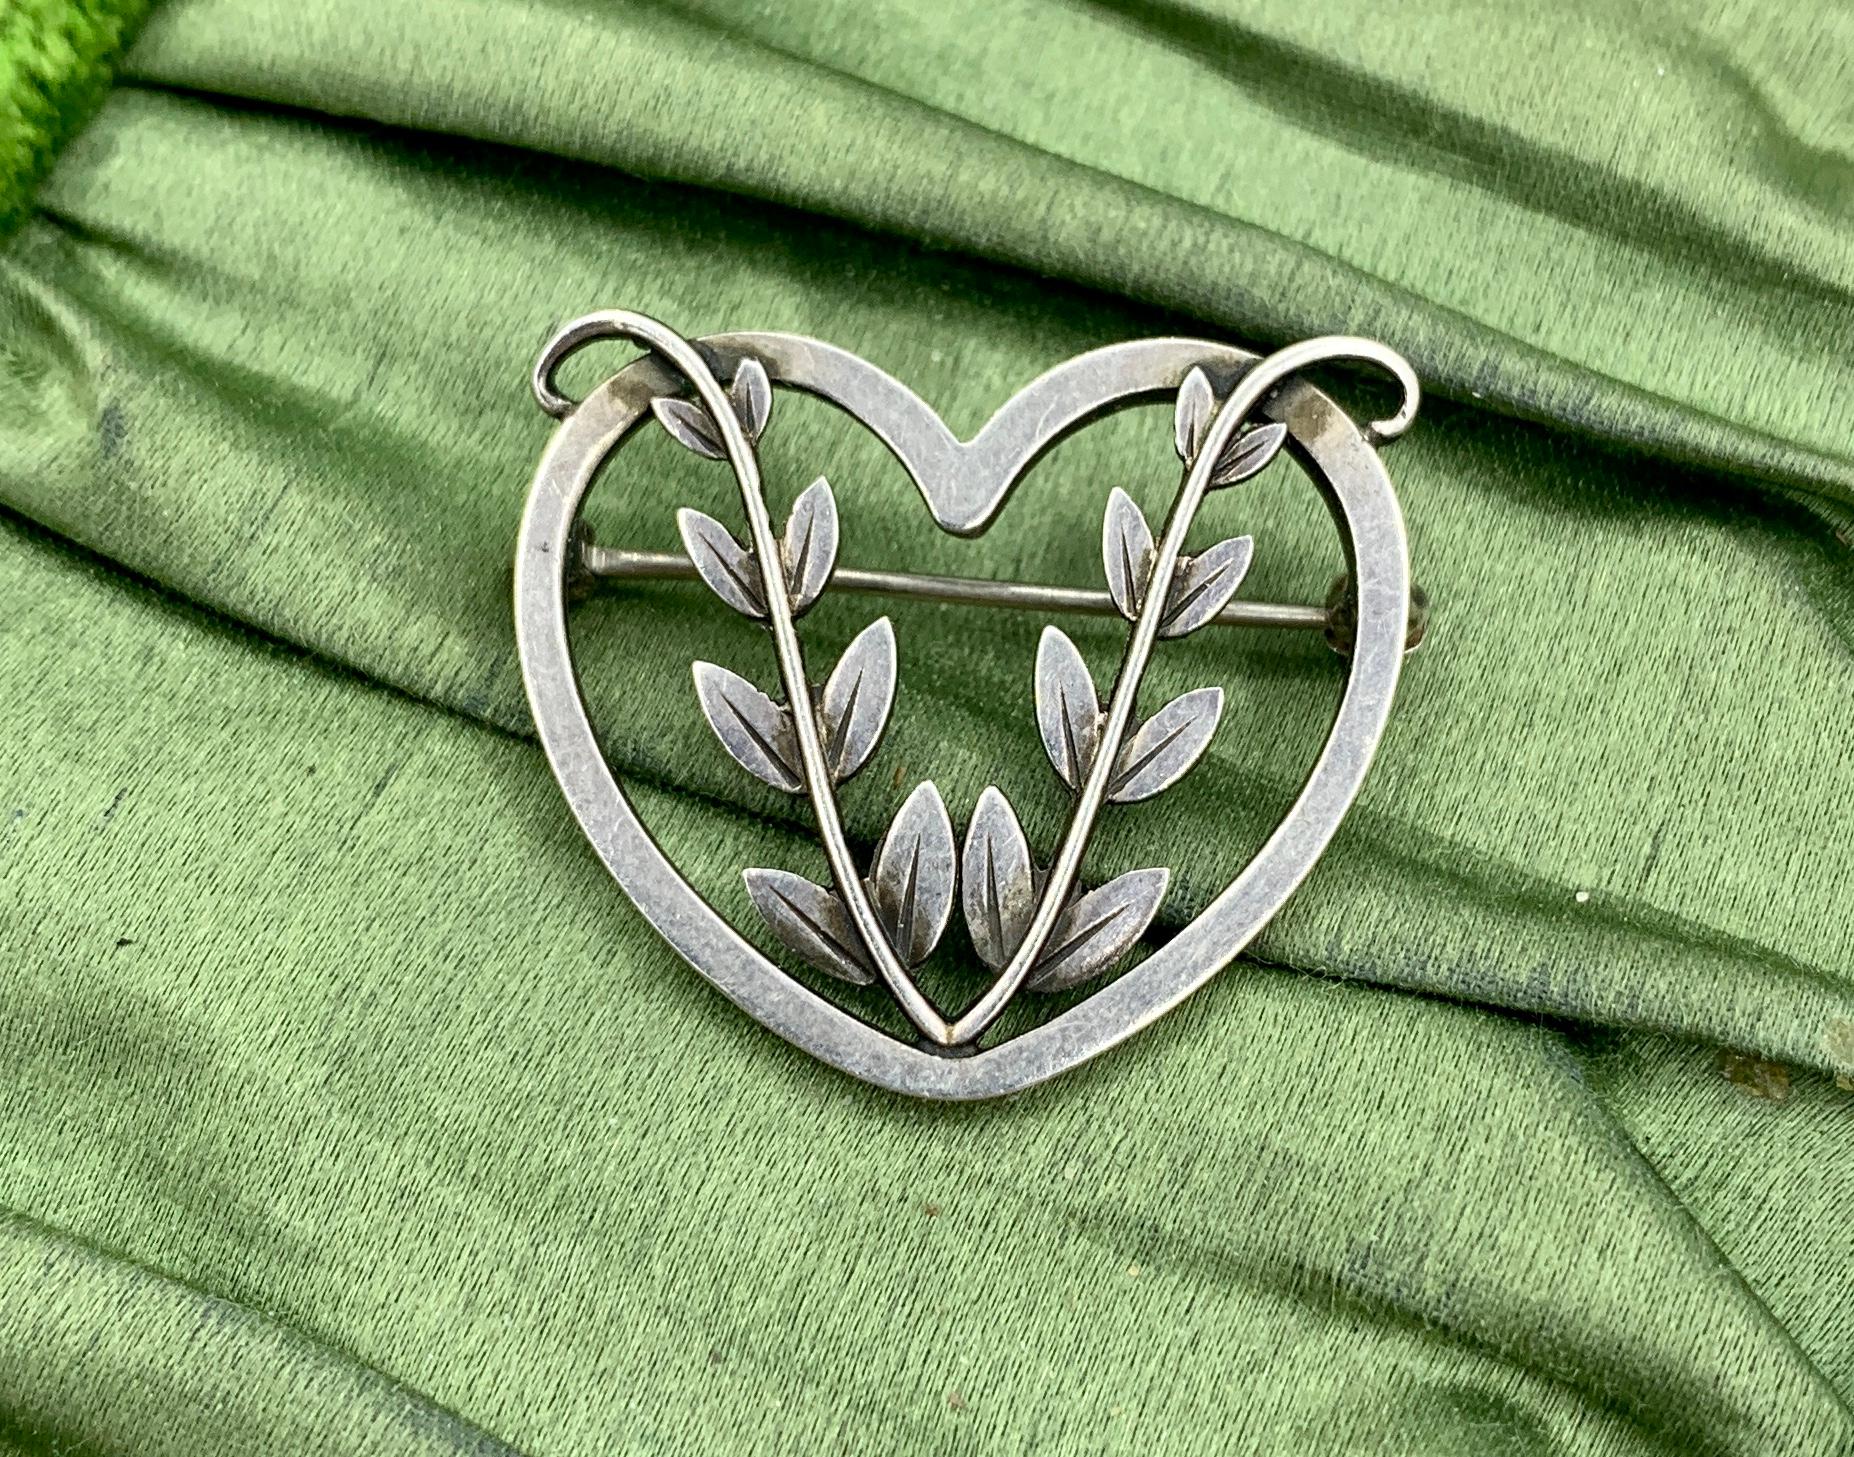 This is the wonderful Georg Jensen Denmark Sterling Silver Heart and Leaf Brooch.  The brooch is fully hallmarked with the Georg Jensen oval dotted punch, Sterling Denmark and design number 242B.  The classic brooch with open work design and the